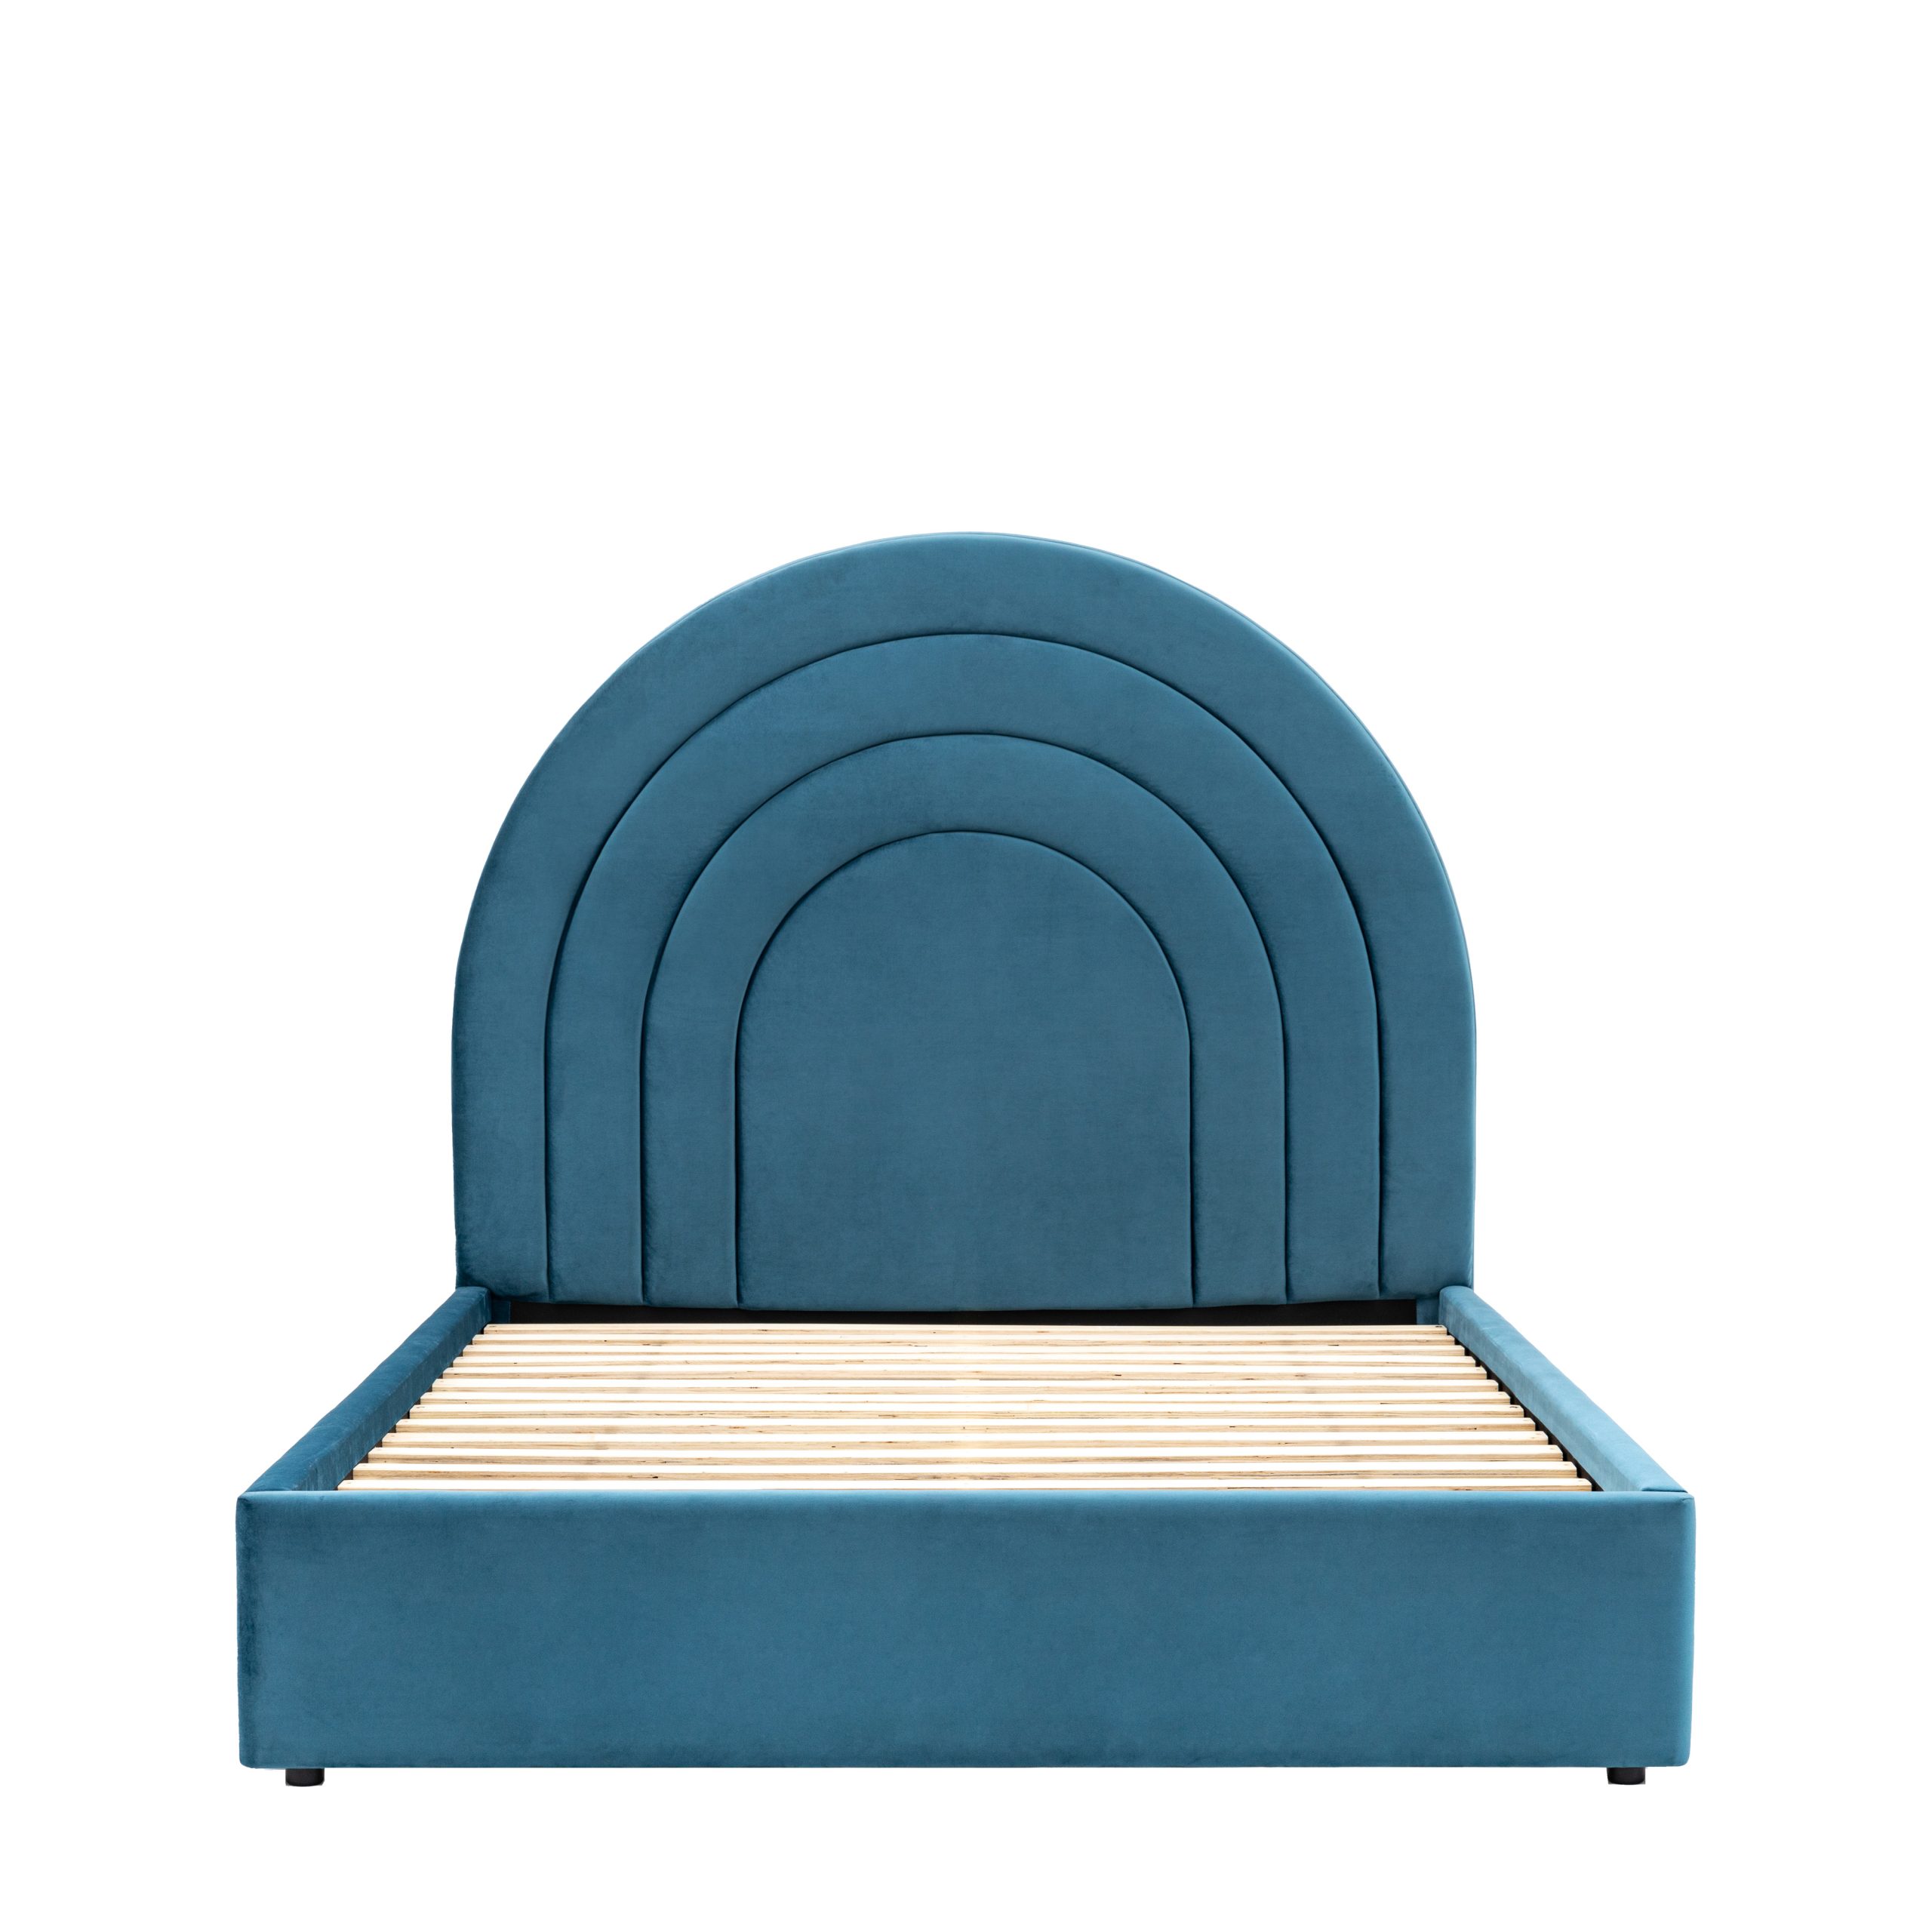 Gallery Direct Arch 5' Bedstead Kingfisher